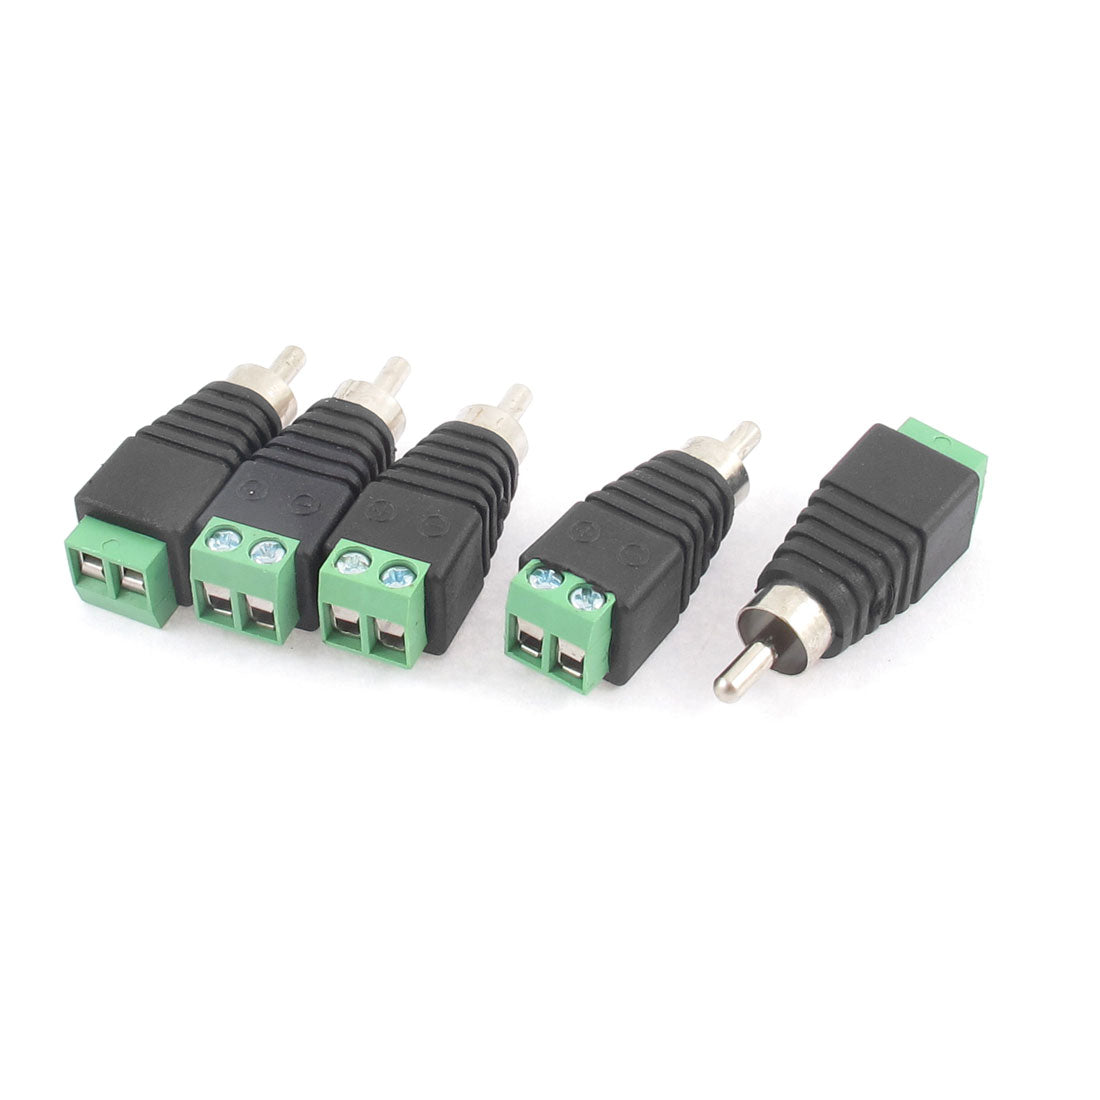 uxcell Uxcell UTP Cat5 Cat6 Cable to AV Phono RCA Male Jack Adapter for CCTV 5pcs